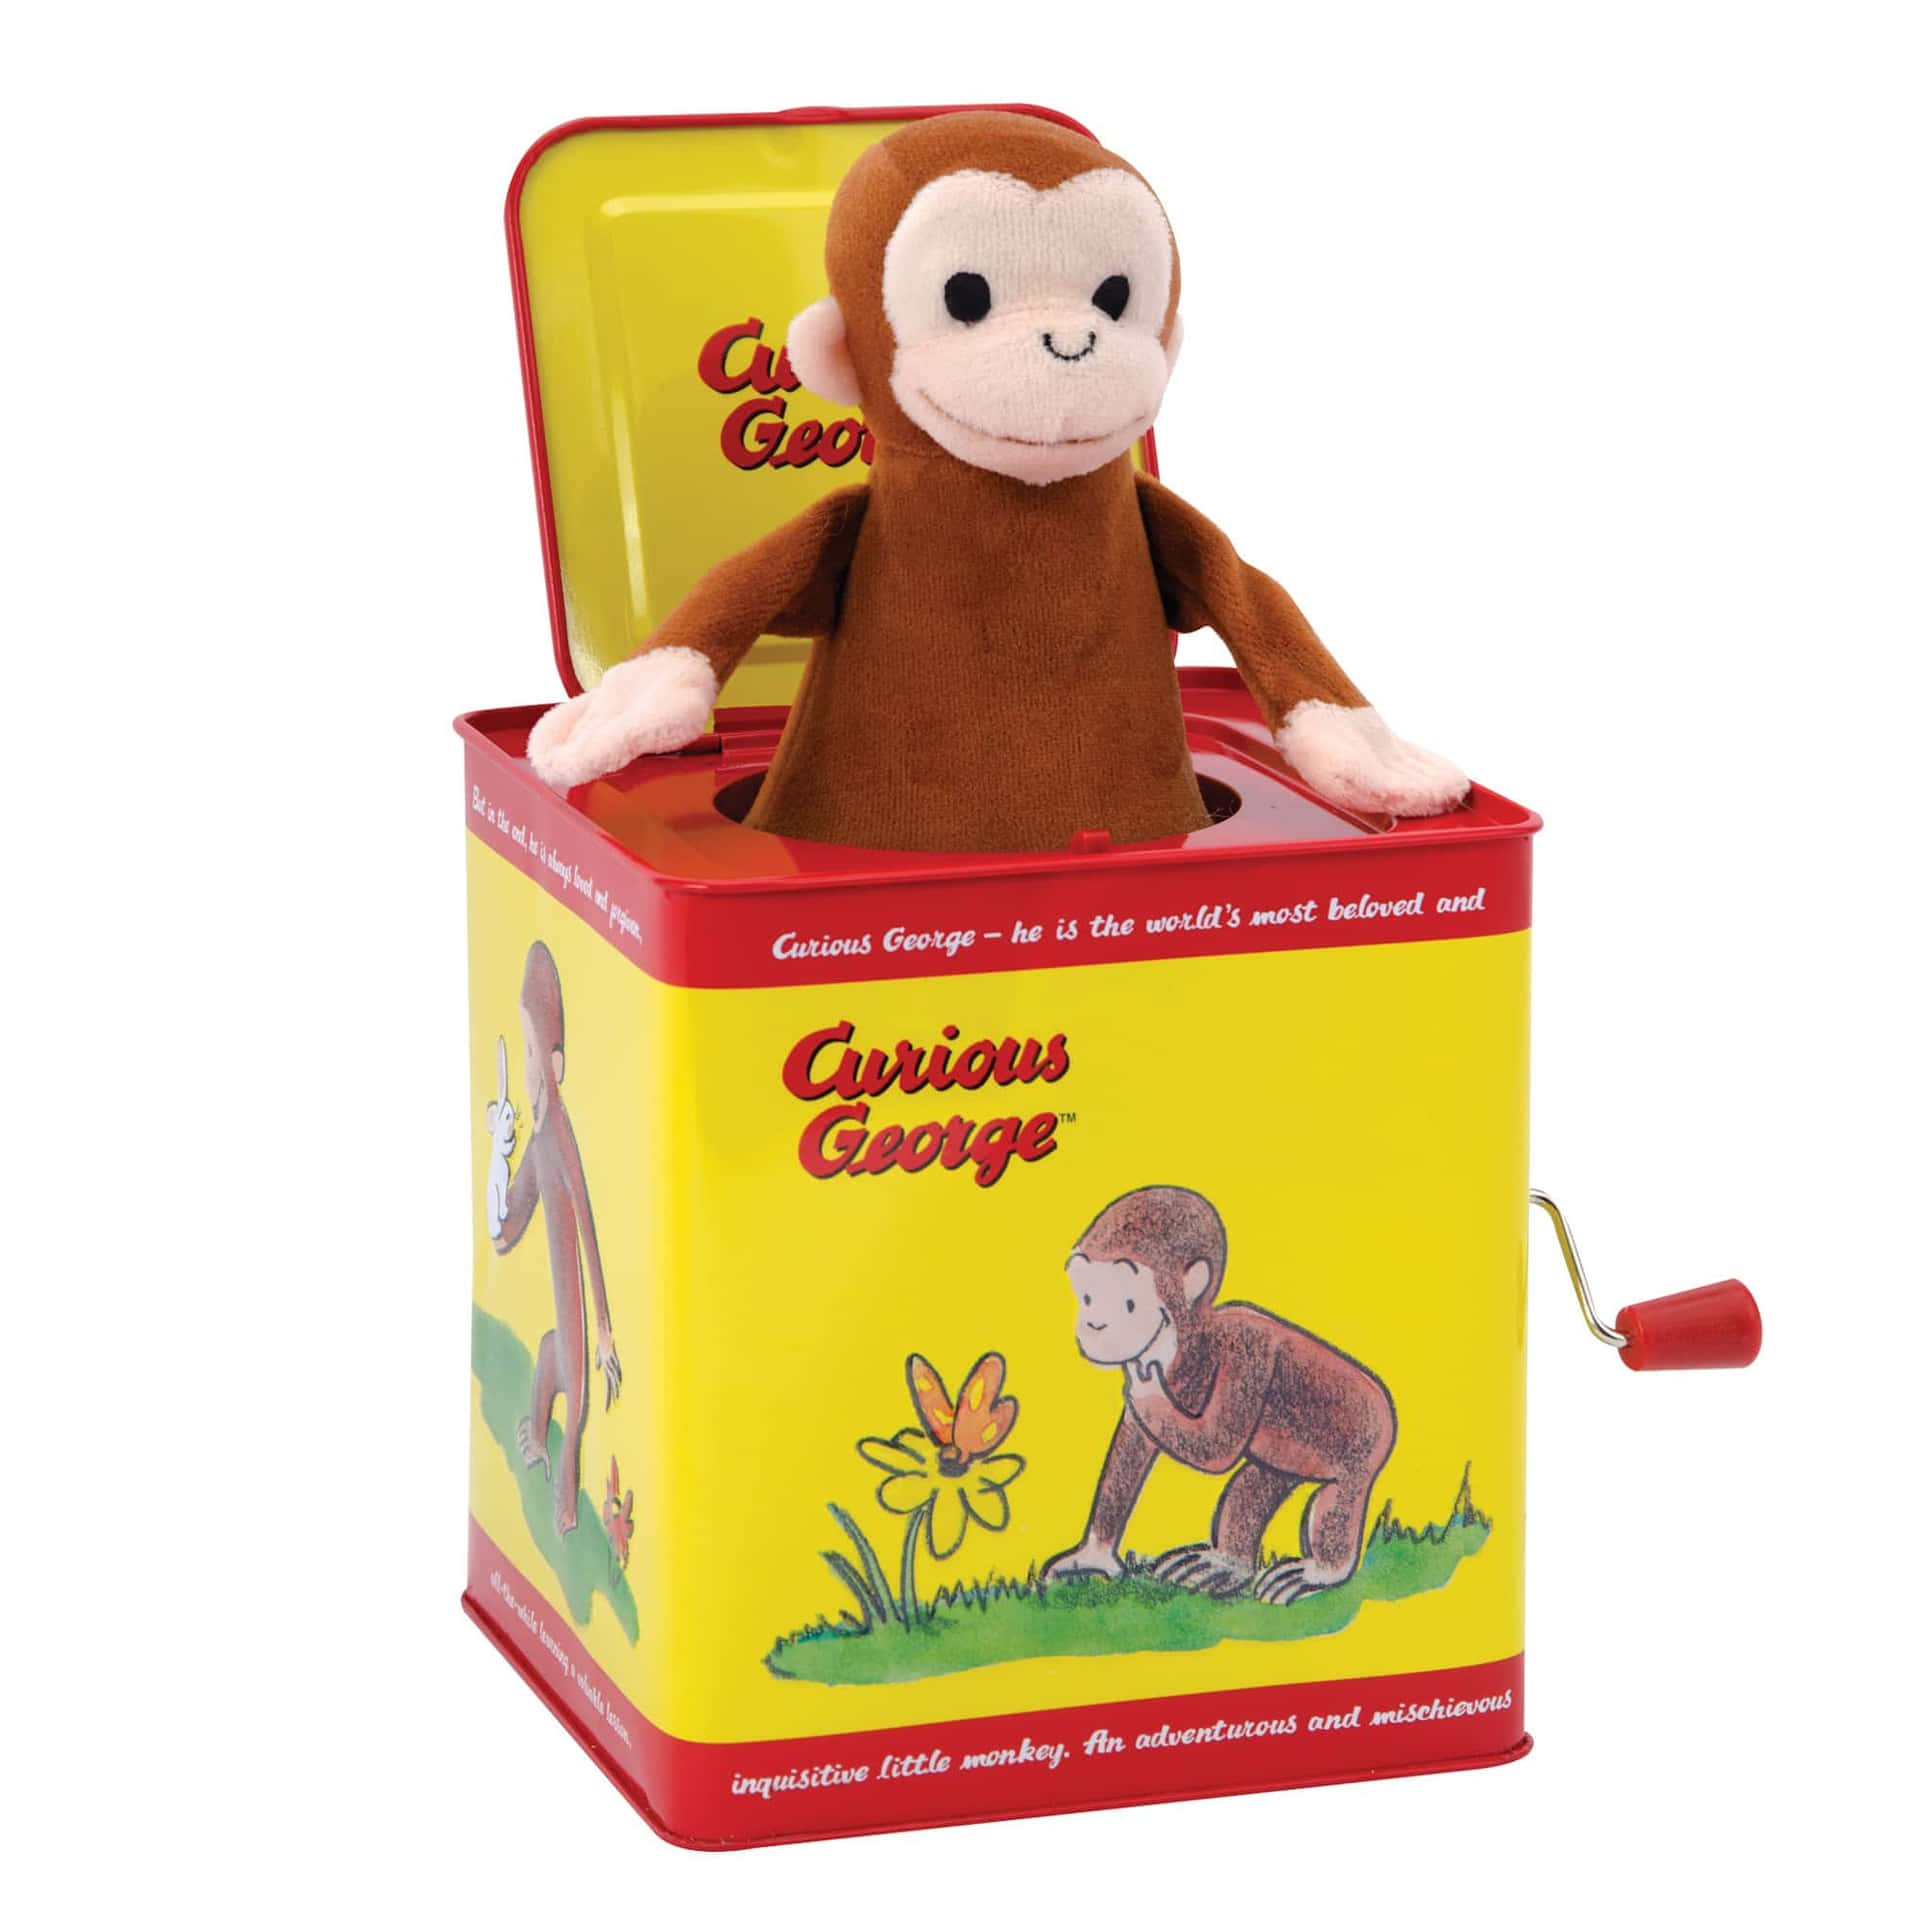 Check out Curious George getting up to some more mischief!